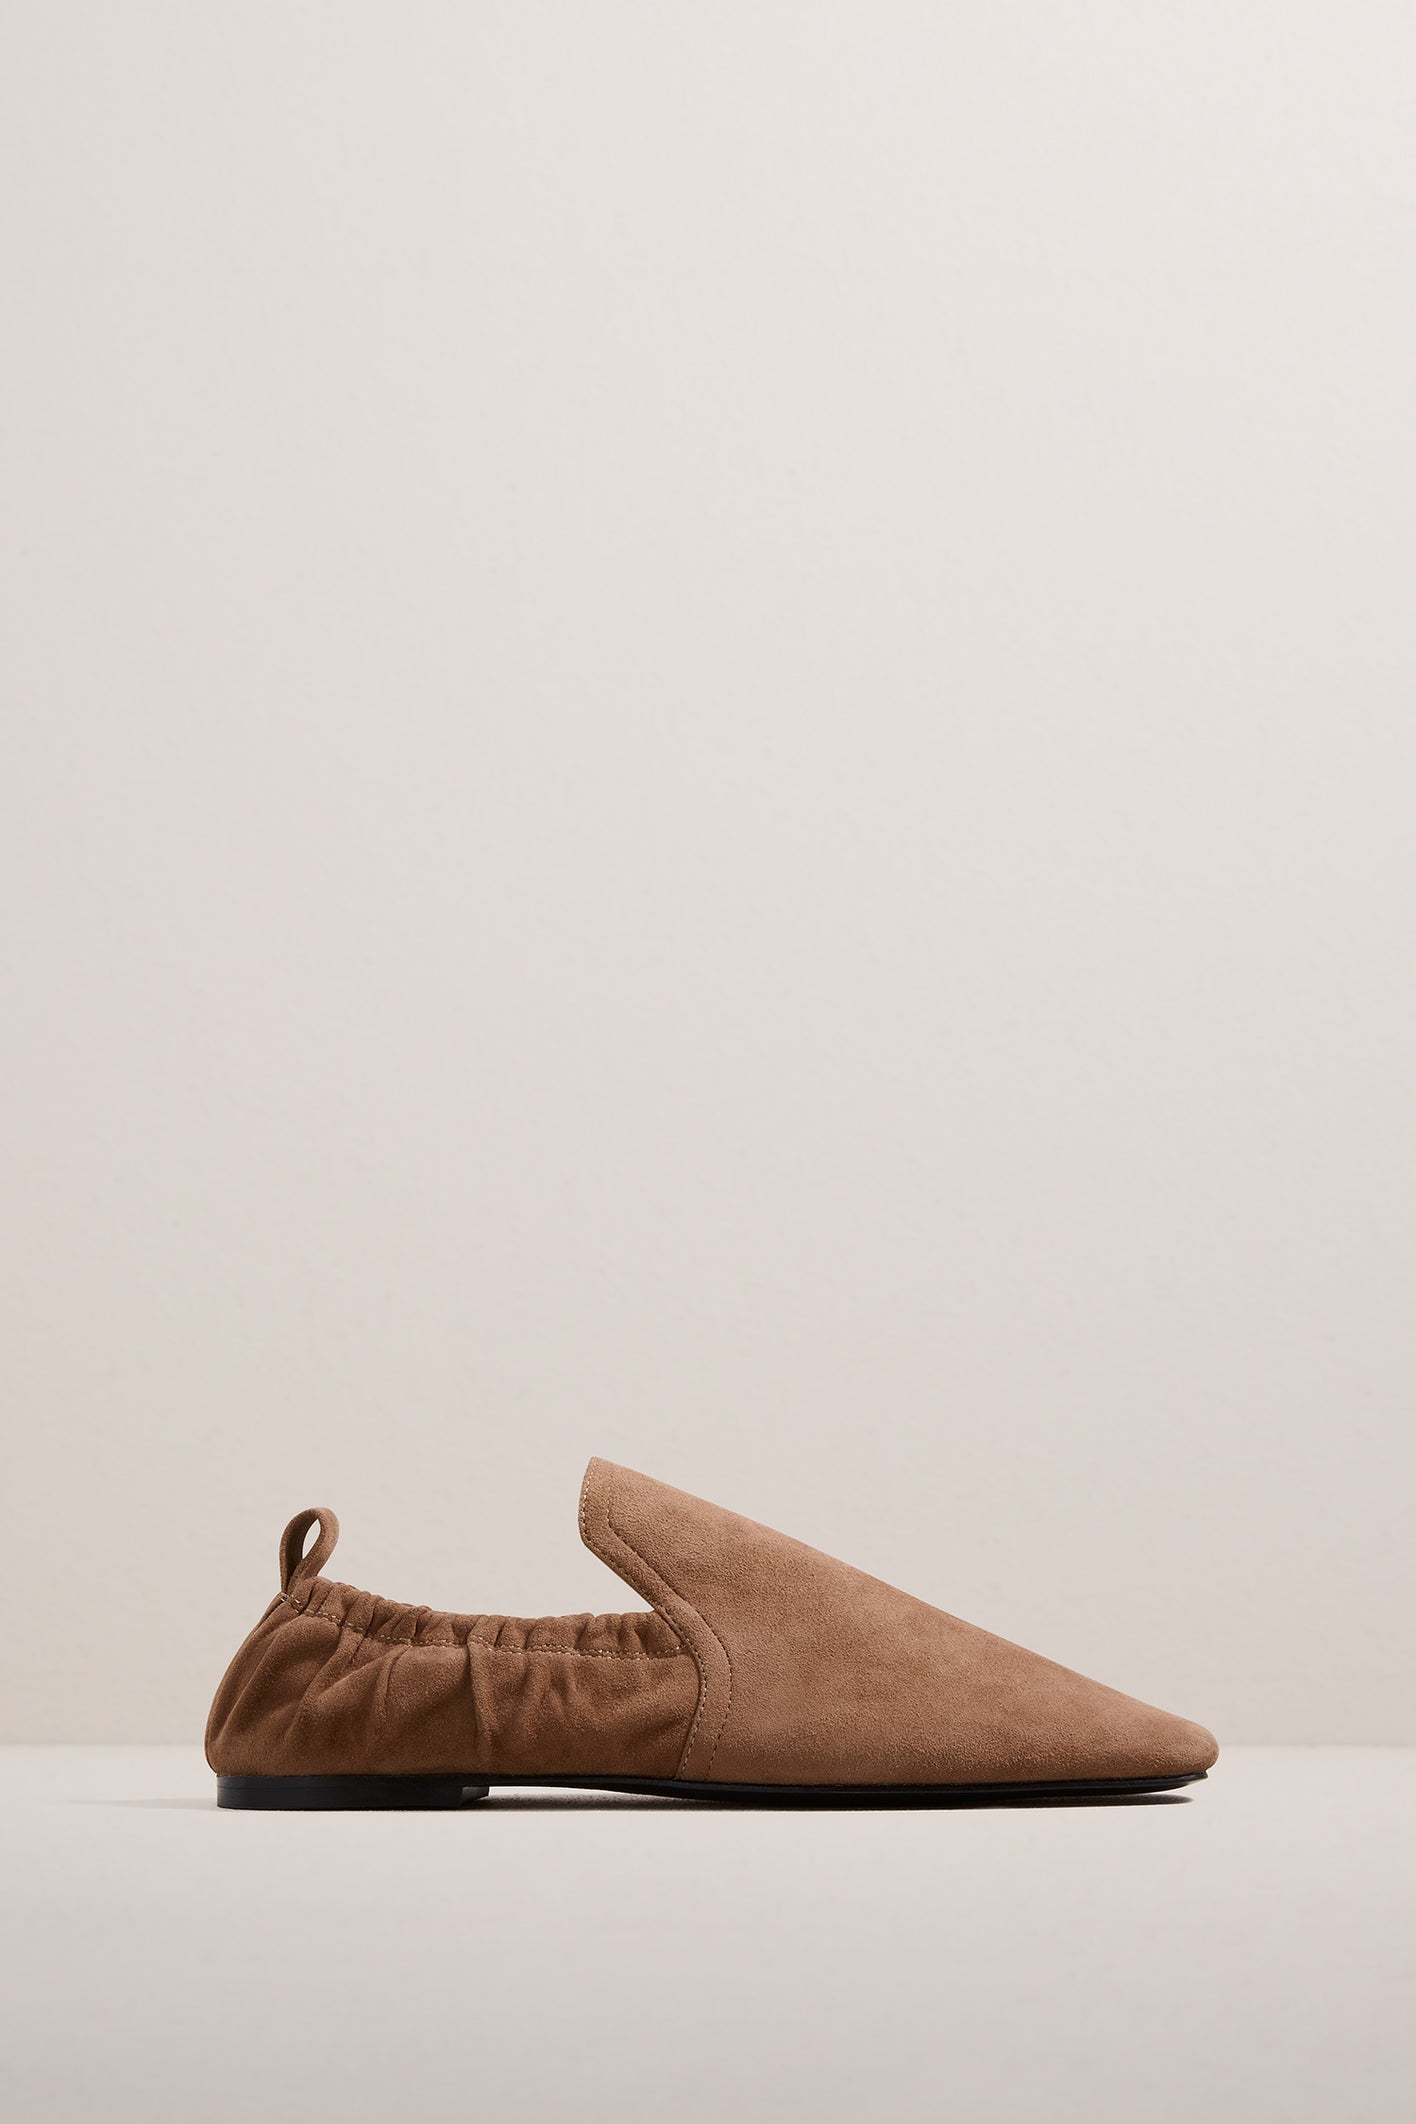 The Delphine Loafer